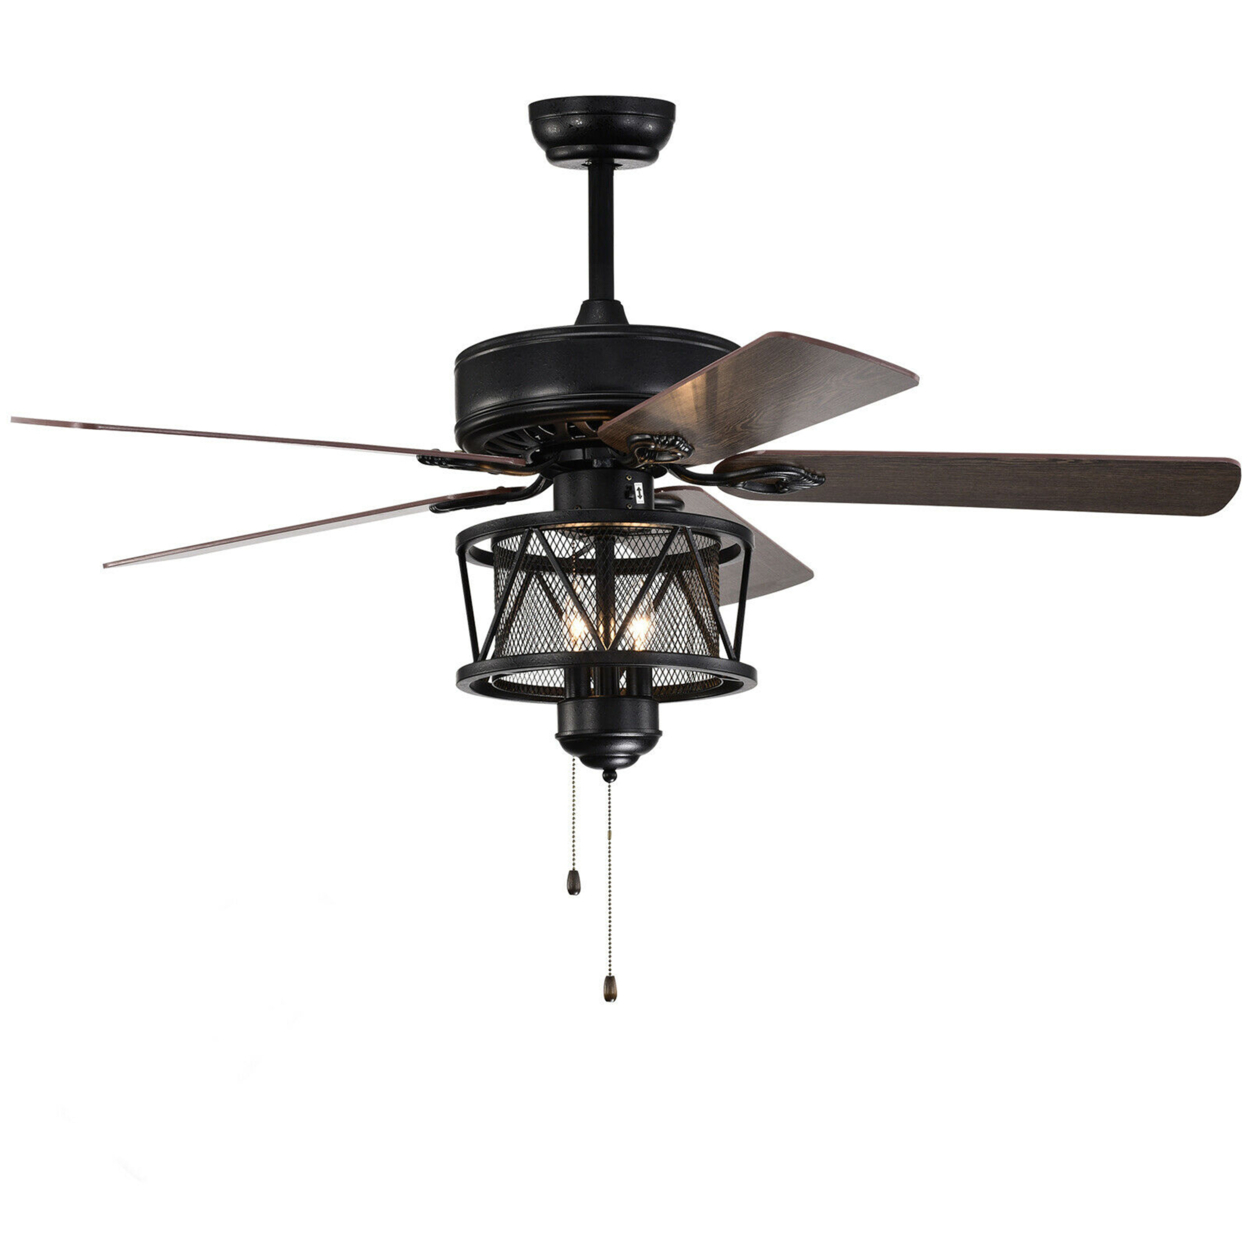 50'' Ceiling Fan With Lights Reversible Blades W/ Pull Chain Control Living Room